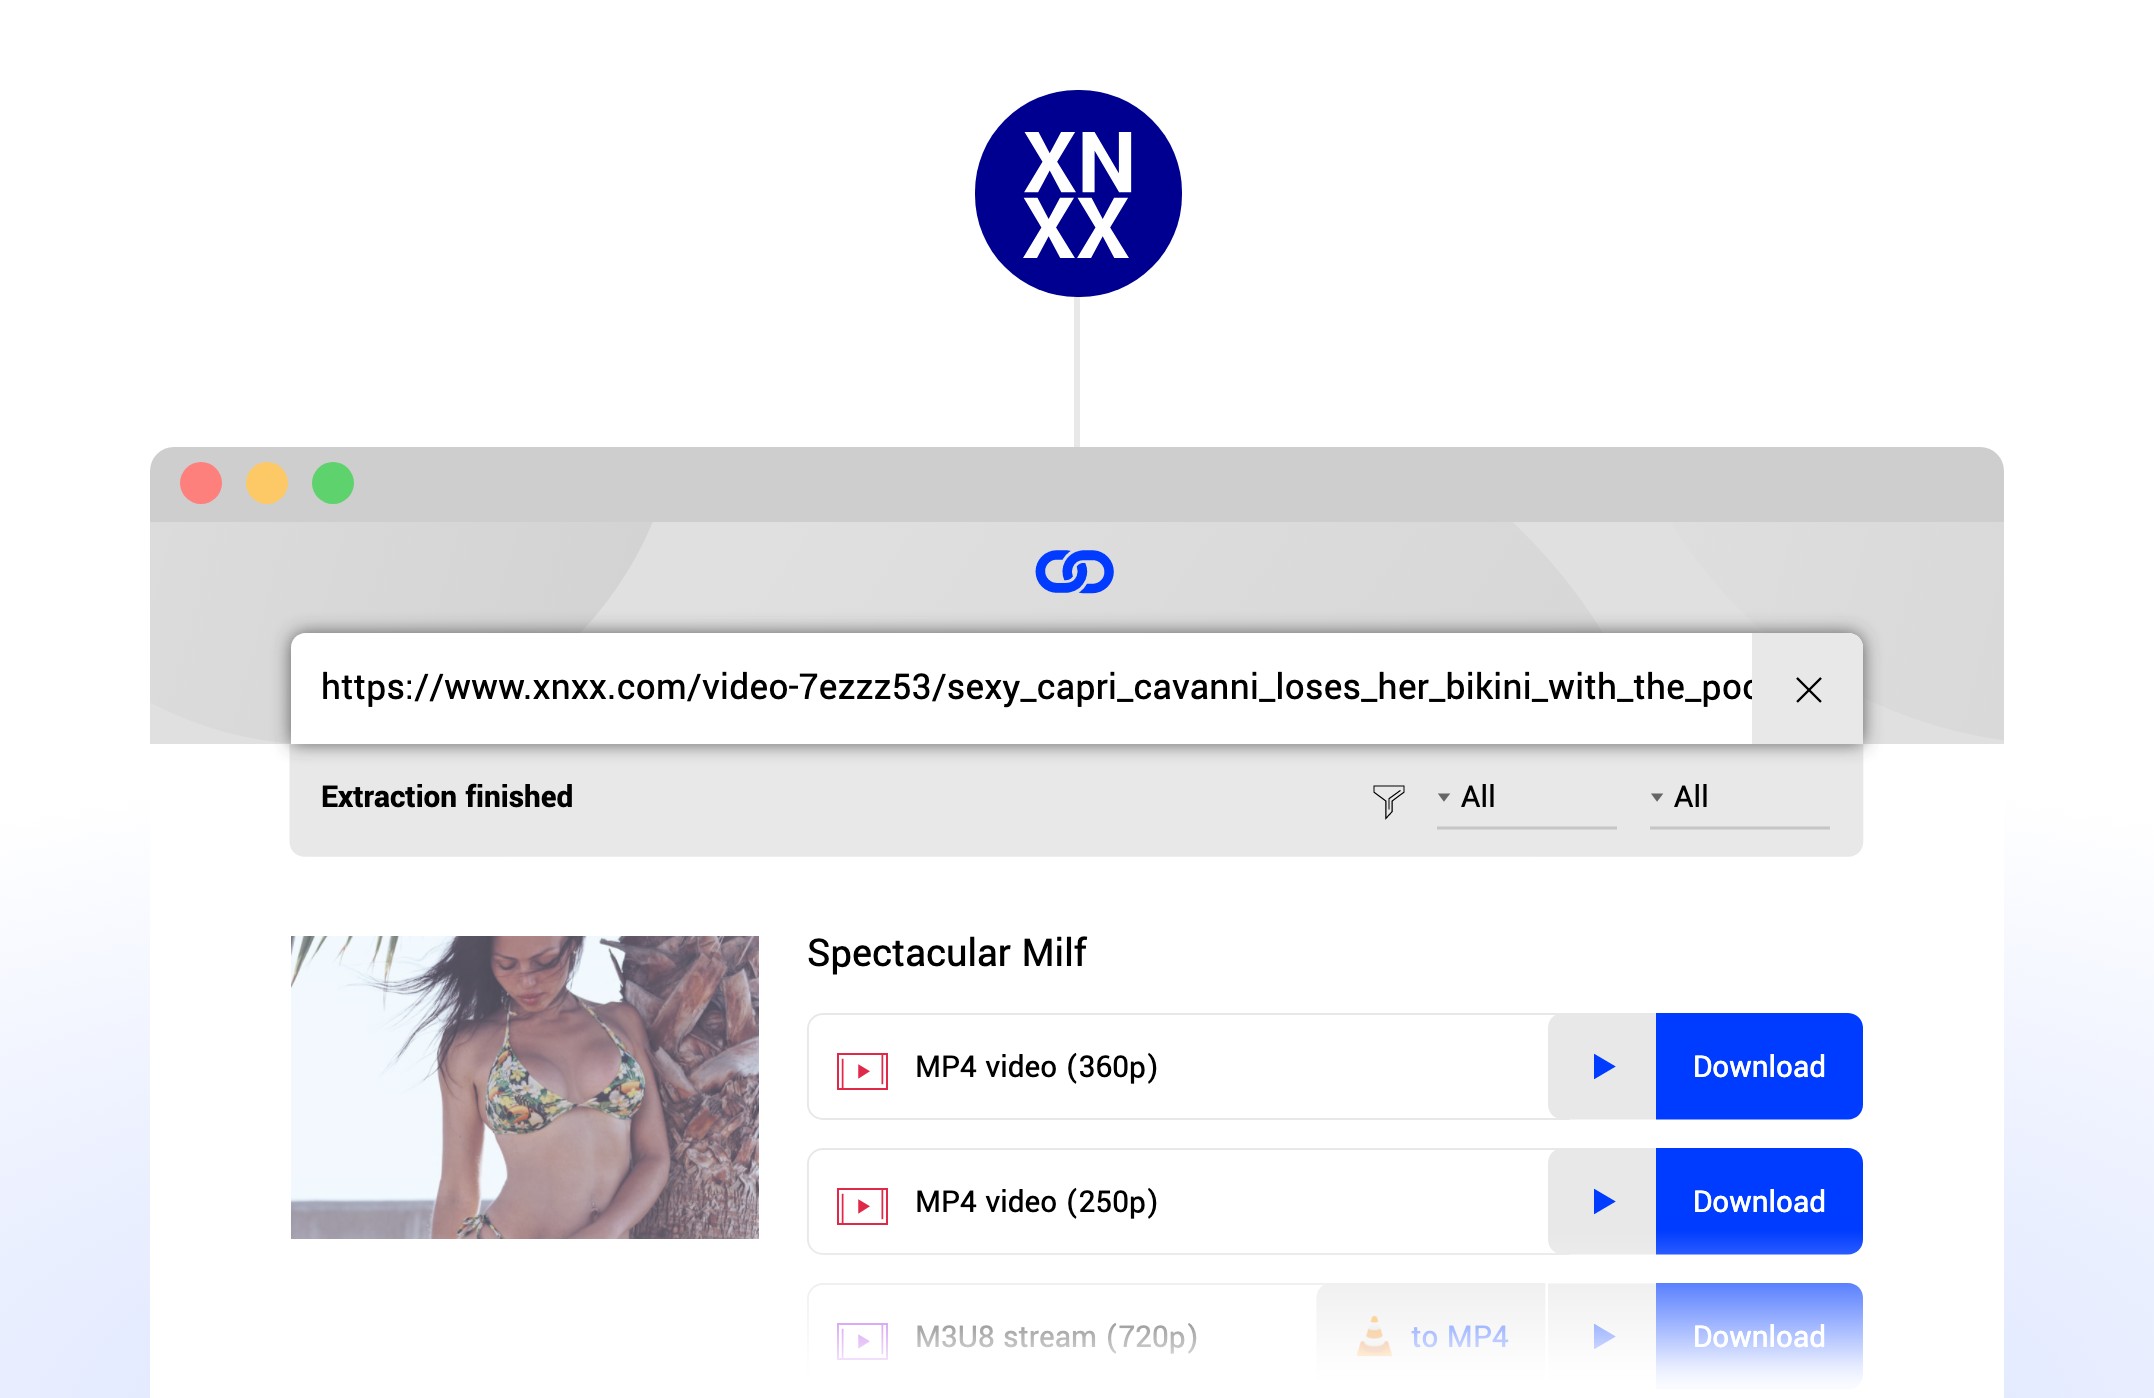 chris jumps recommends xnxx video download online pic